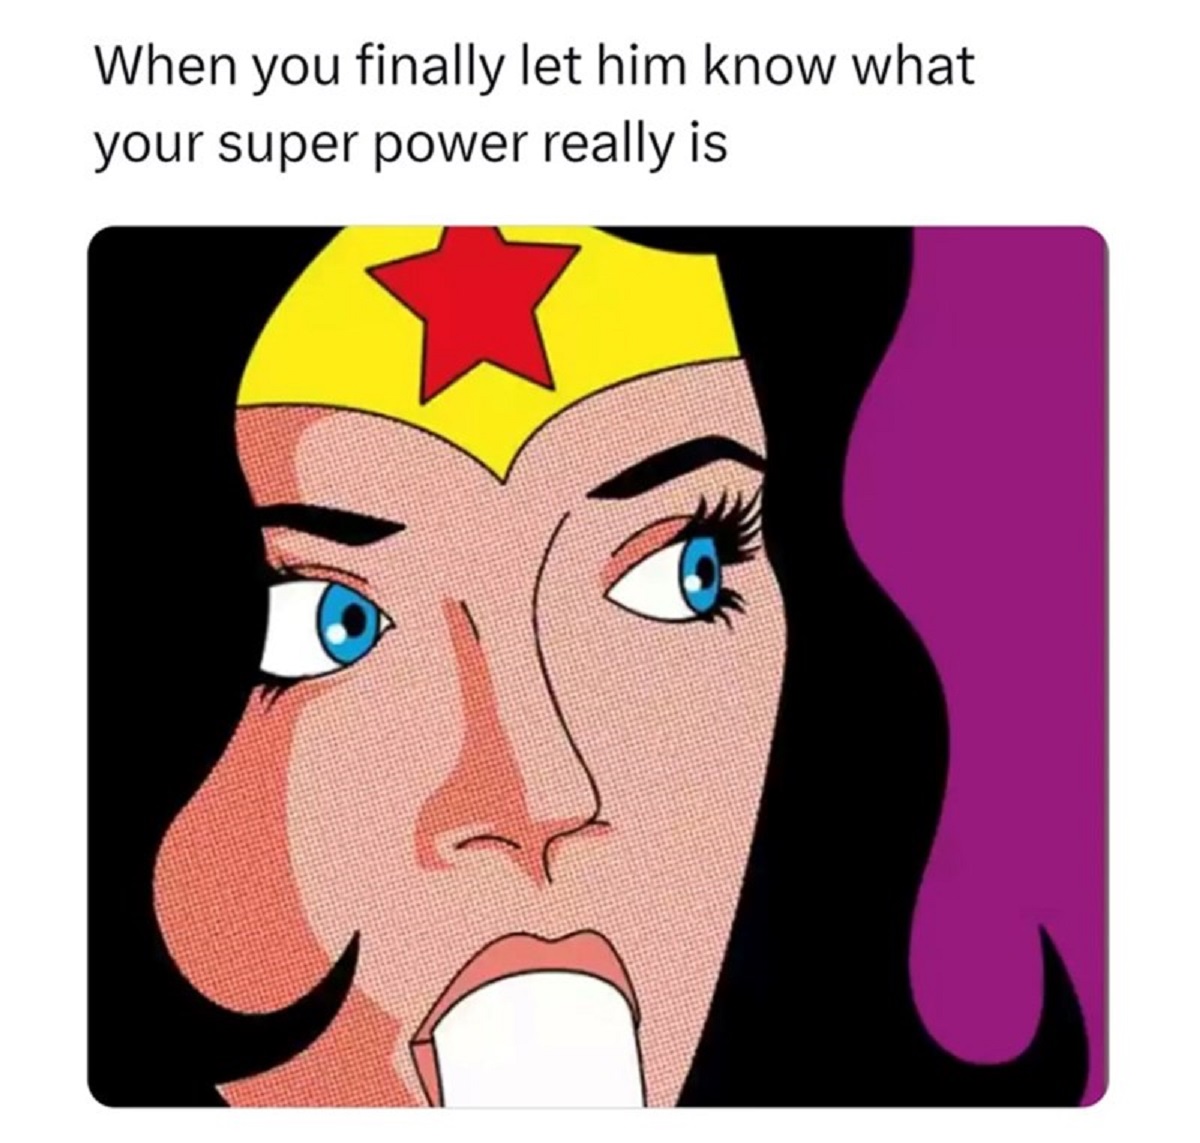 spicy memes -  cartoon - When you finally let him know what your super power really is